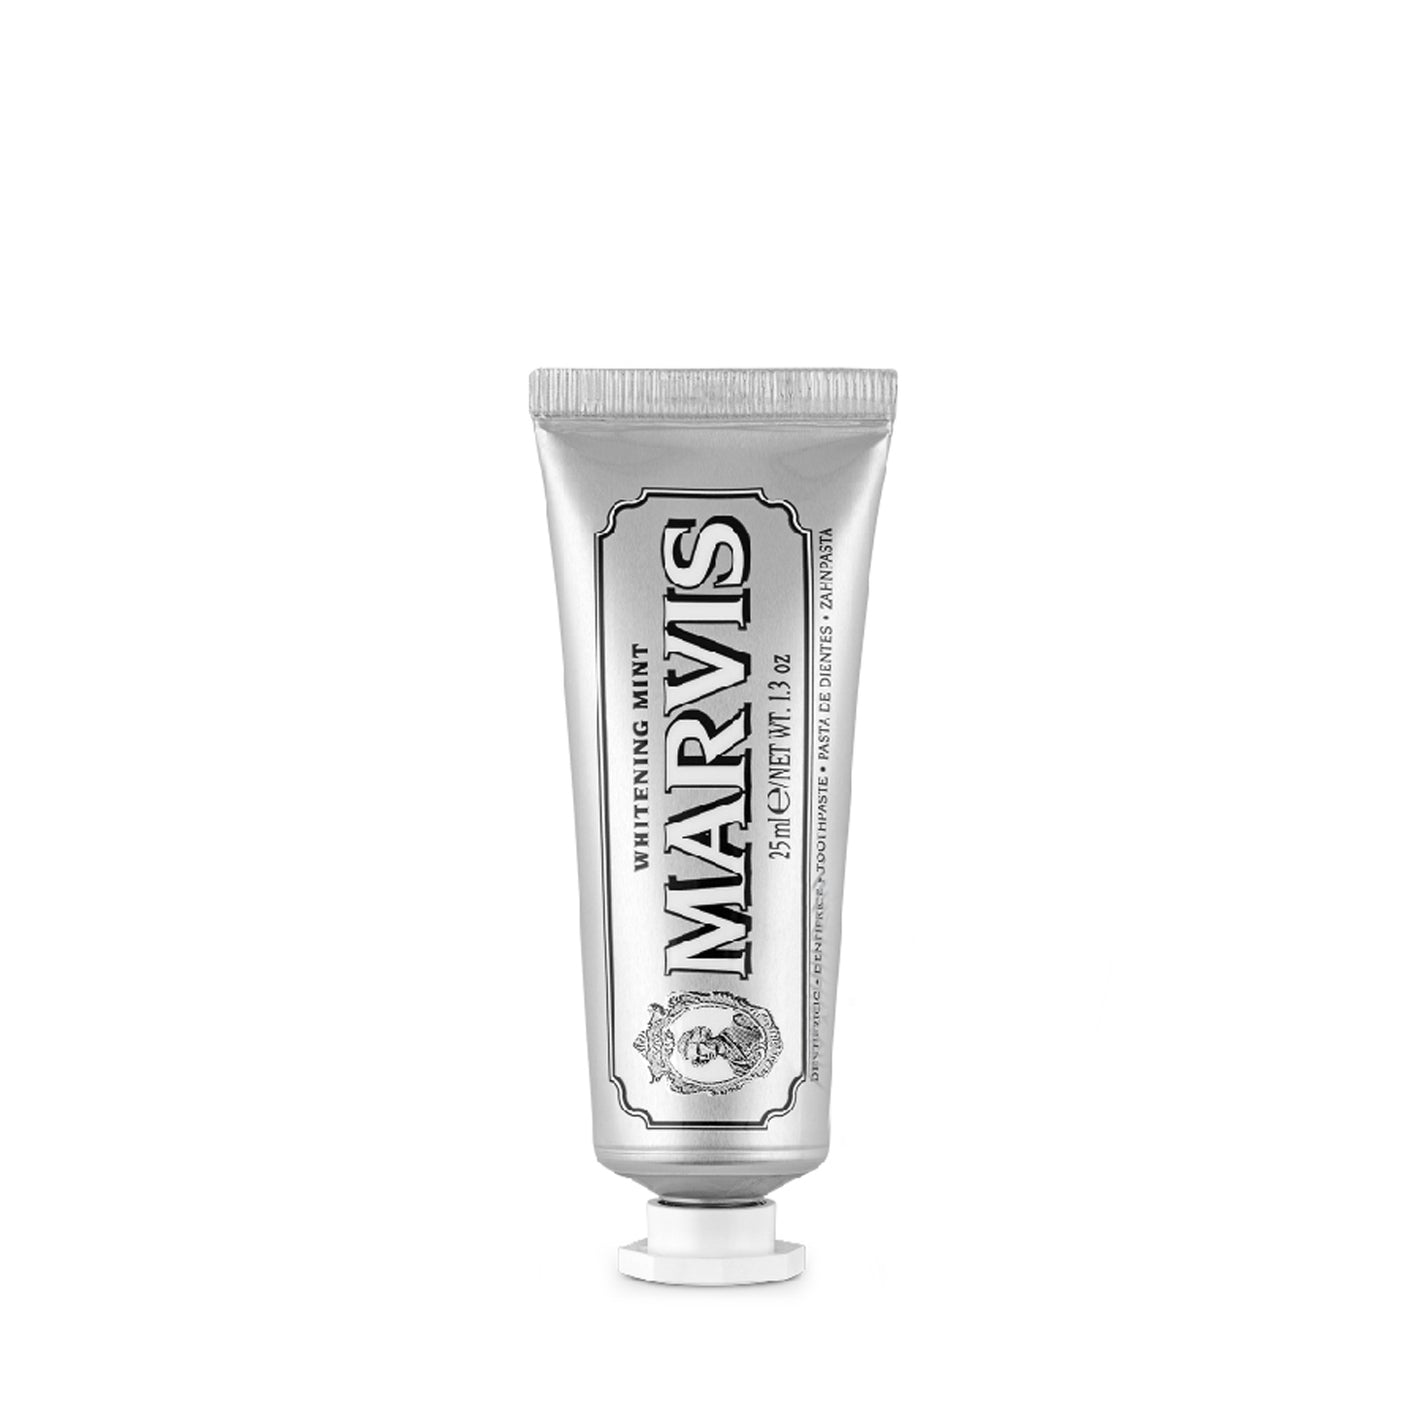 Marvis Whitening Mint Travel Toothpaste